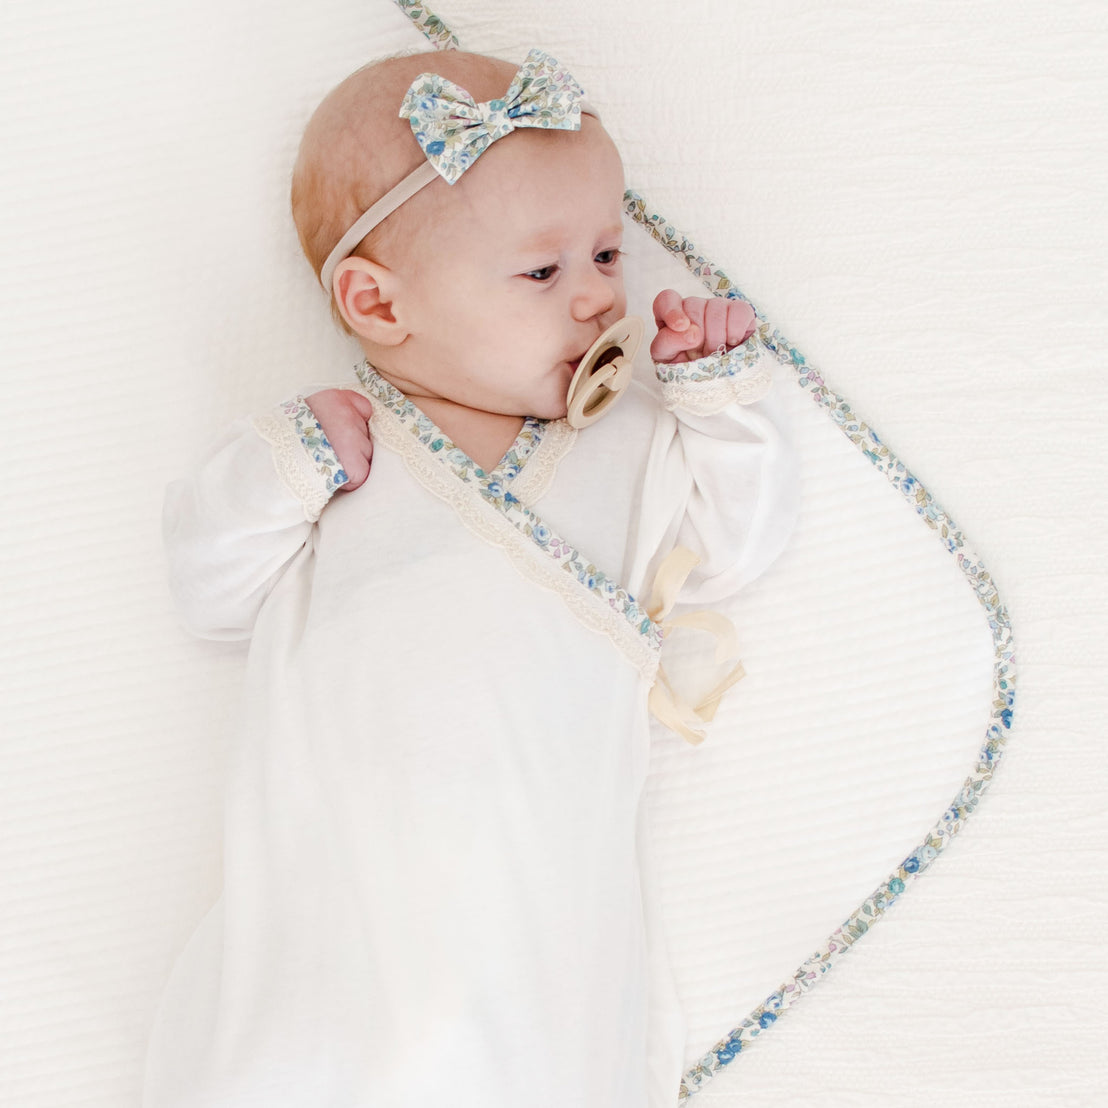 A baby with a light blue bow headband and a pacifier lies on an upscale white background, encircled by a Petite Fleur Personalized Blanket.